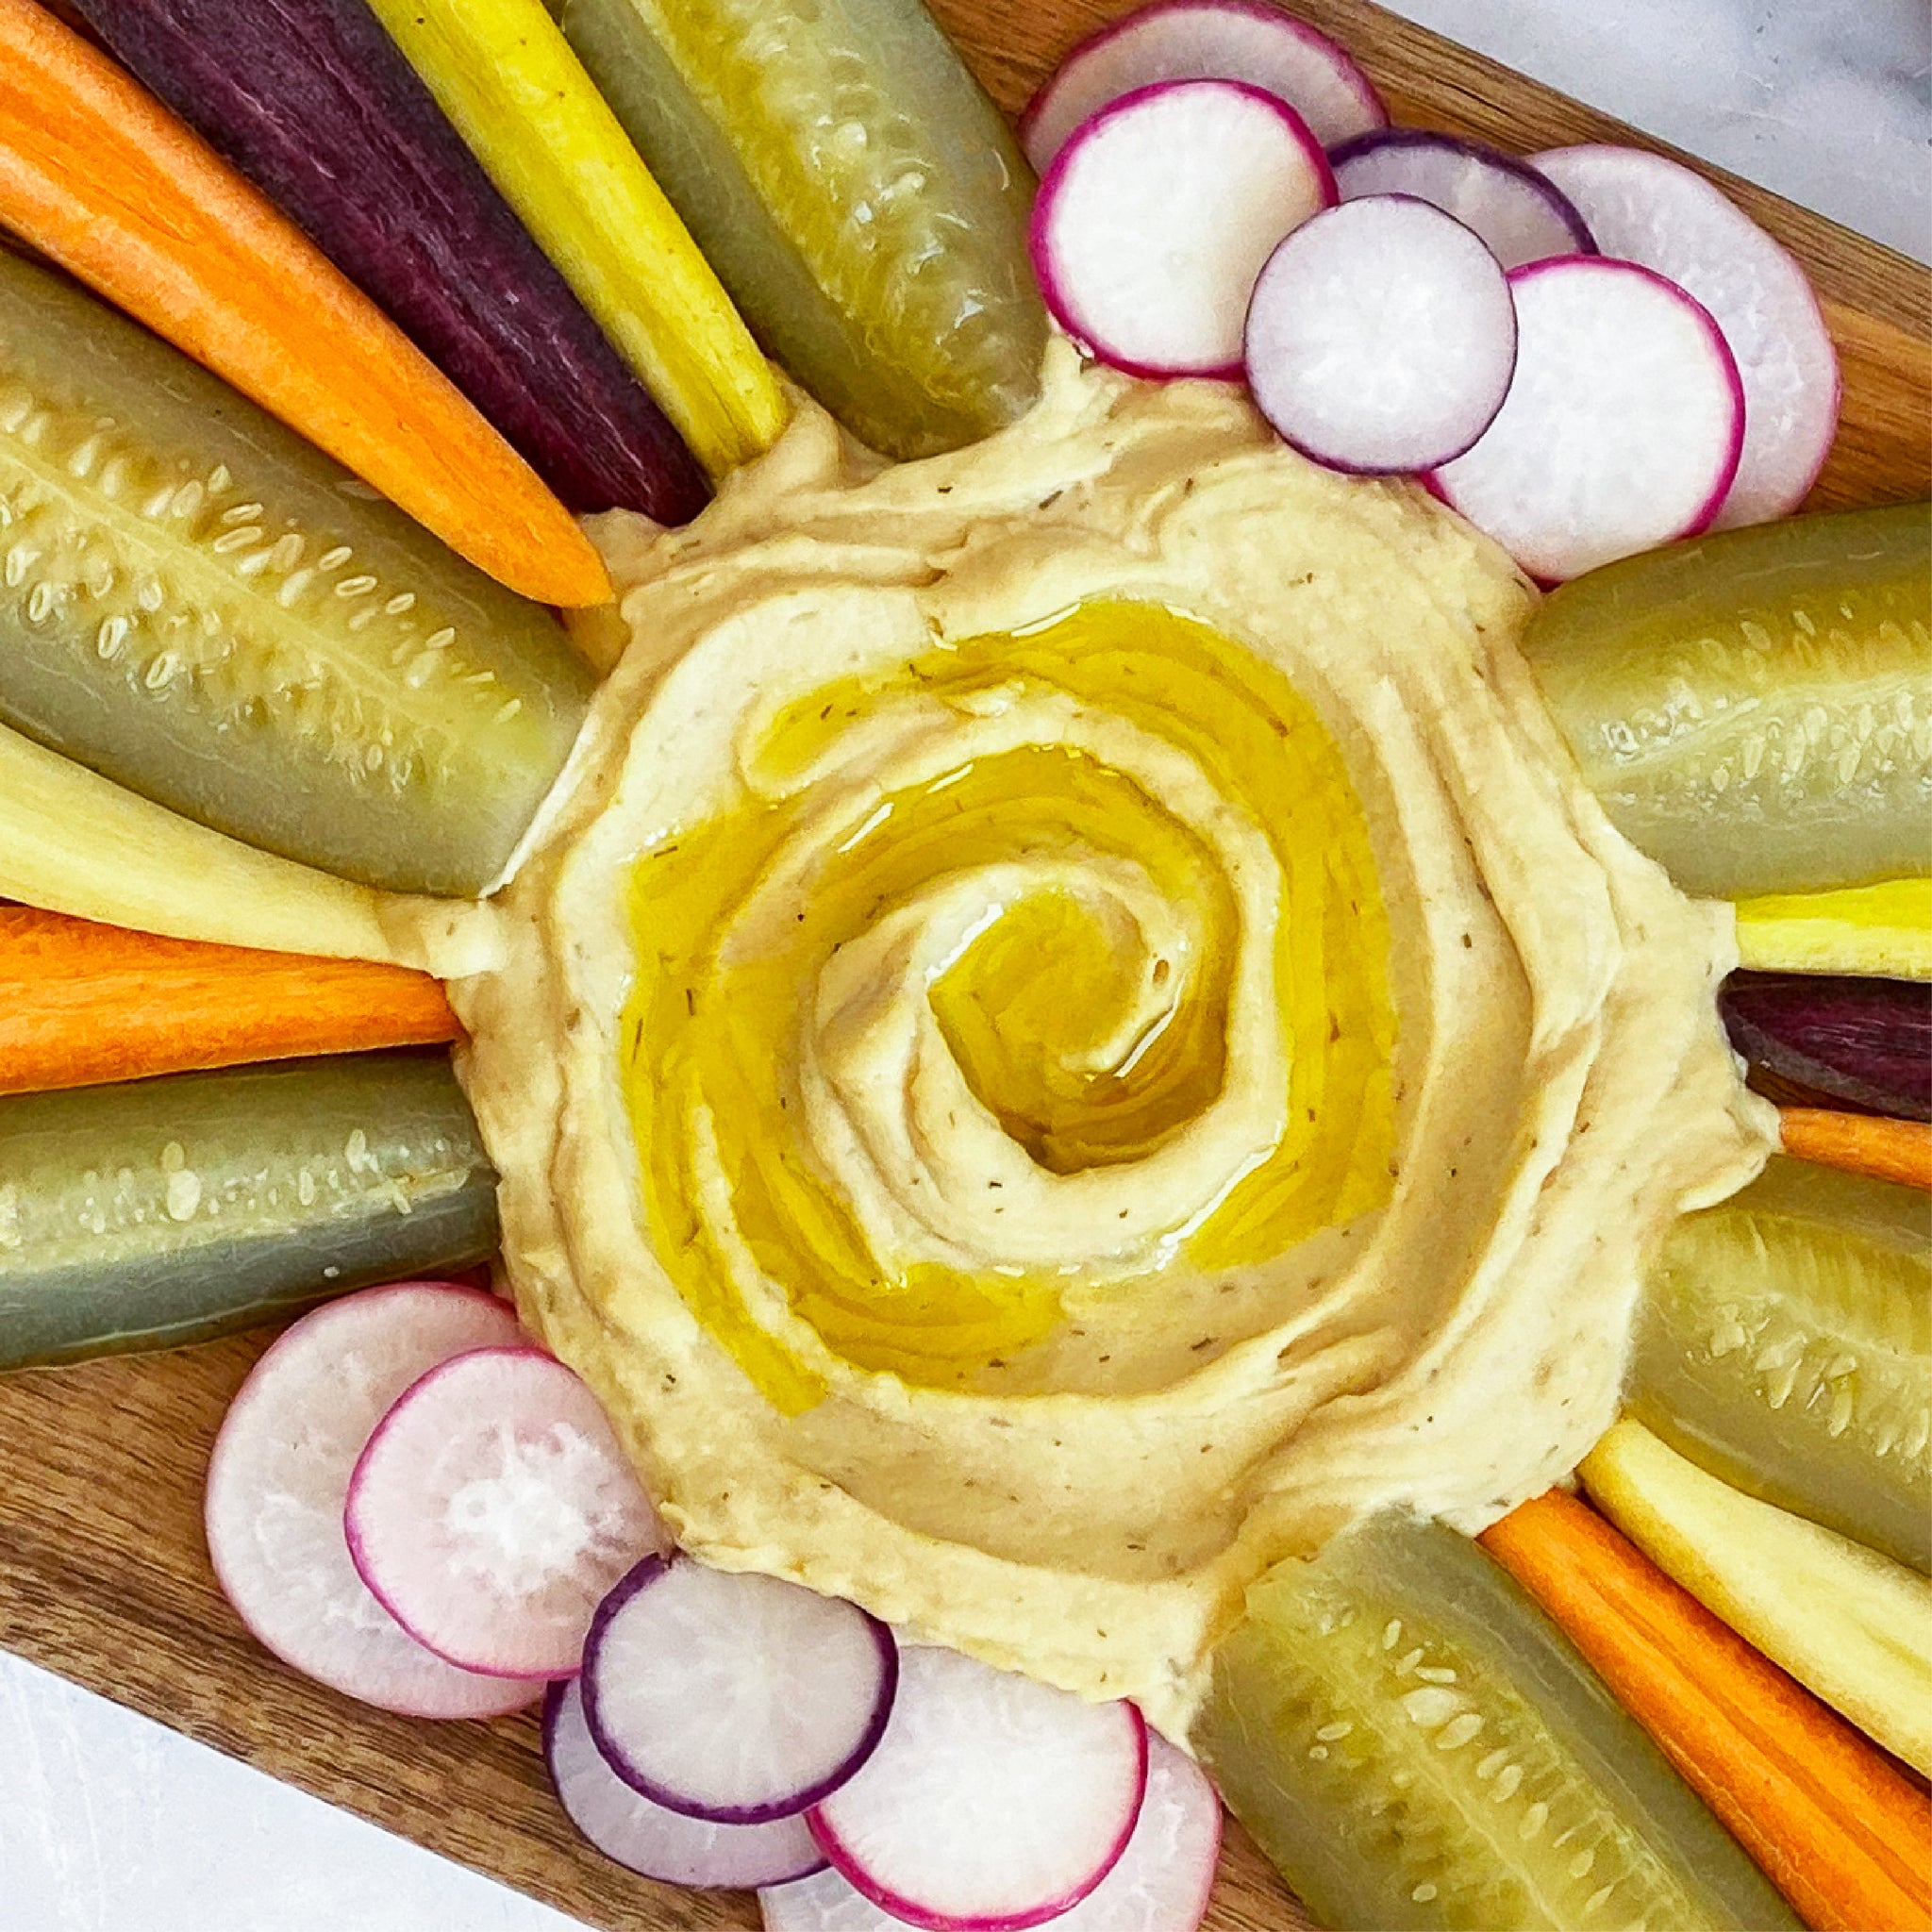 Board with carrots, pickles, radishes, and dill pickle hummus